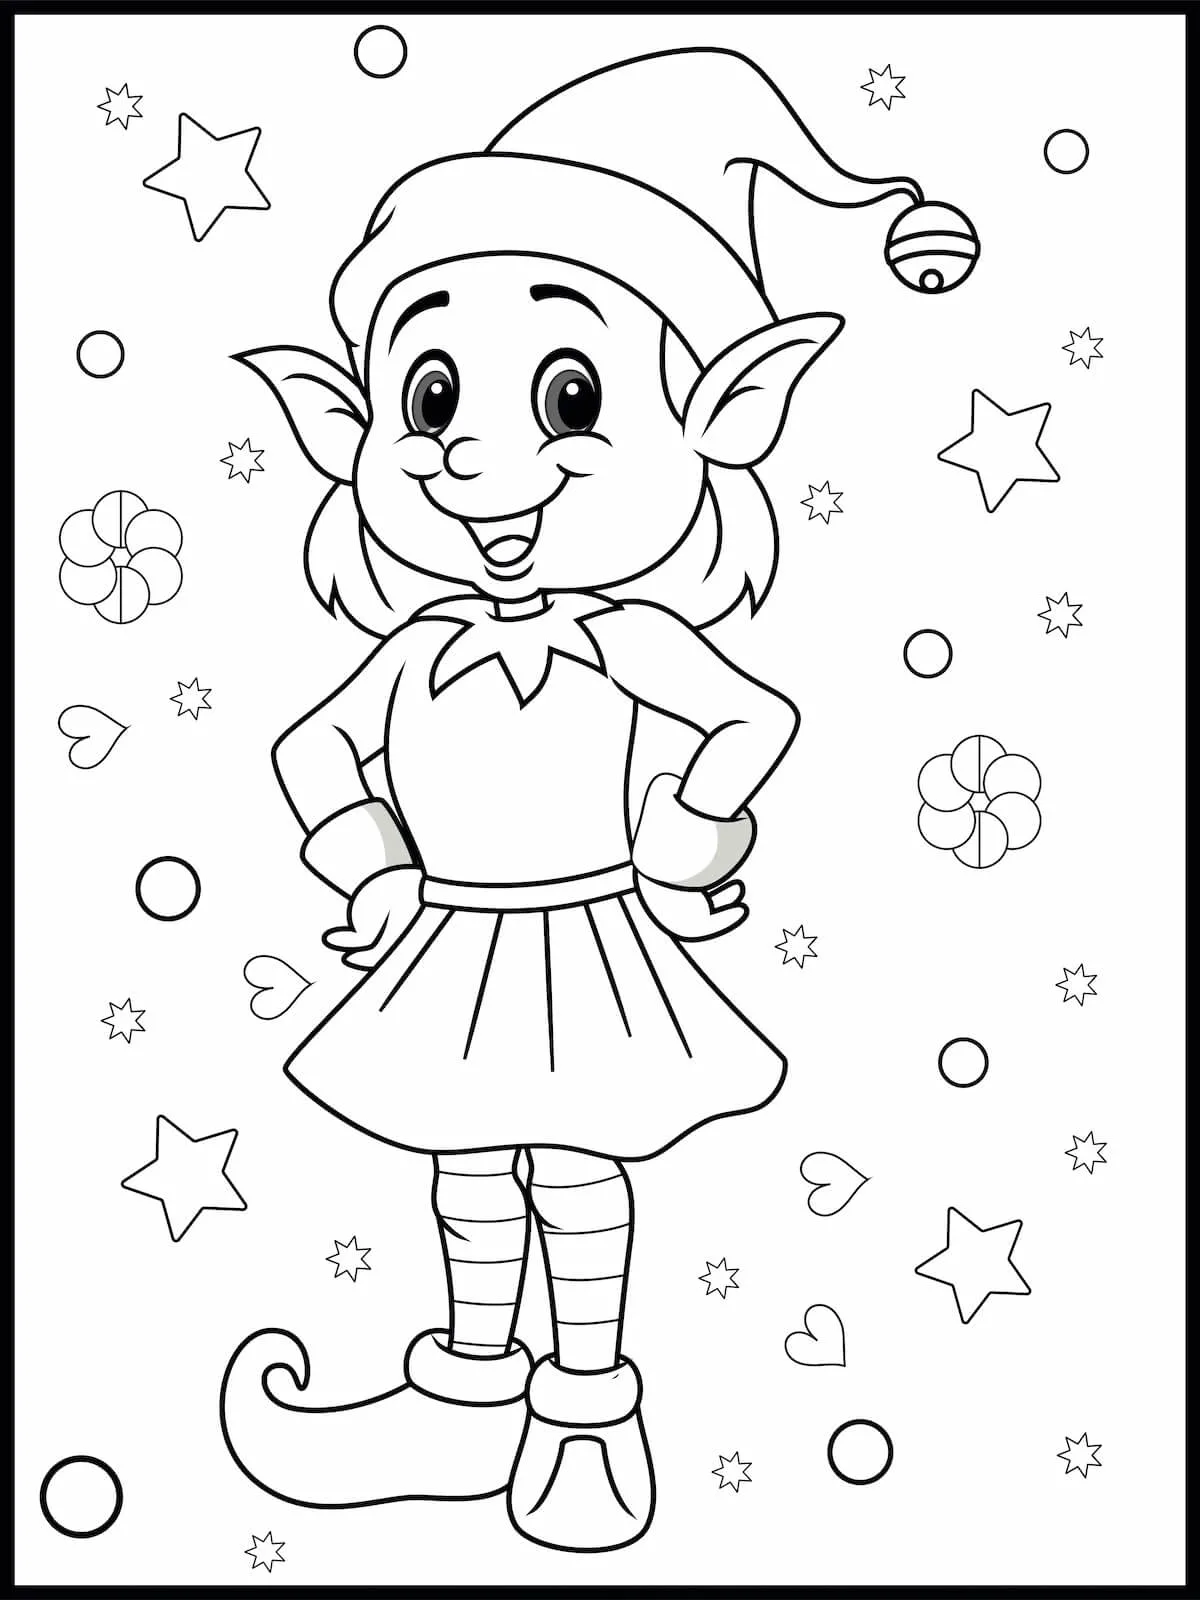 Christmas elf colouring page